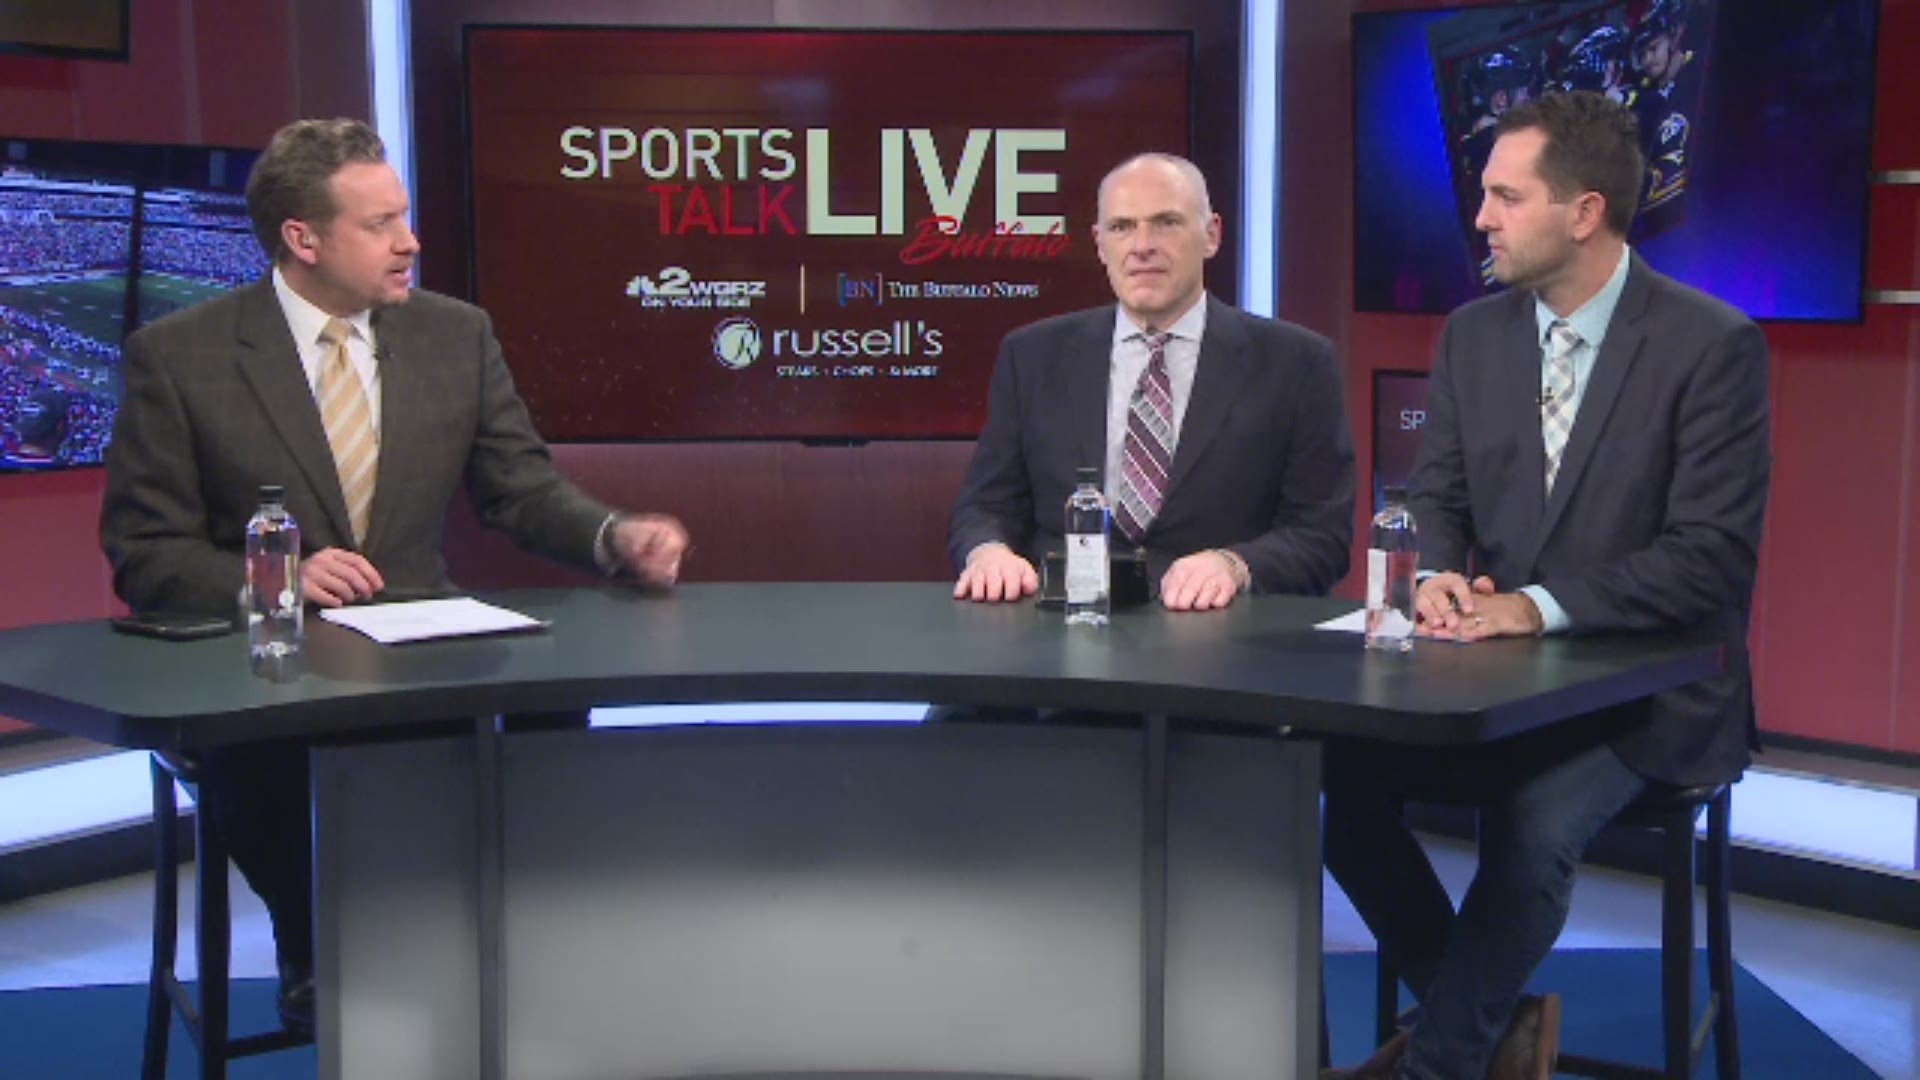 The Sports Talk Live Buffalo crew previews the Bills Ravens game